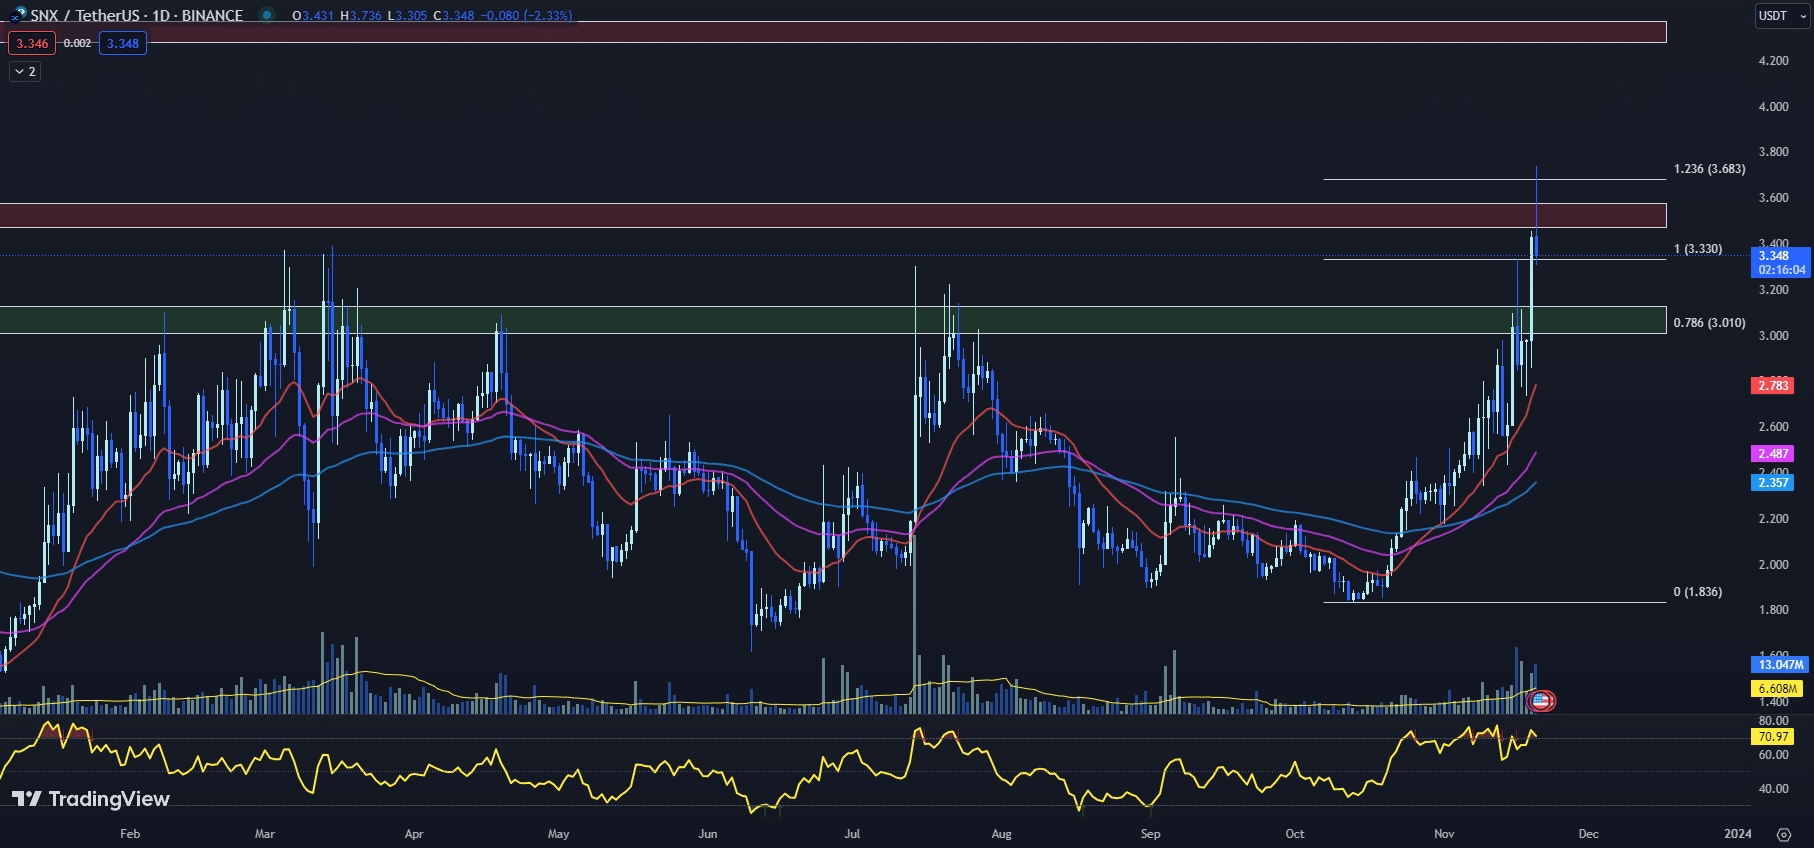 tradingview chart for the SNX price